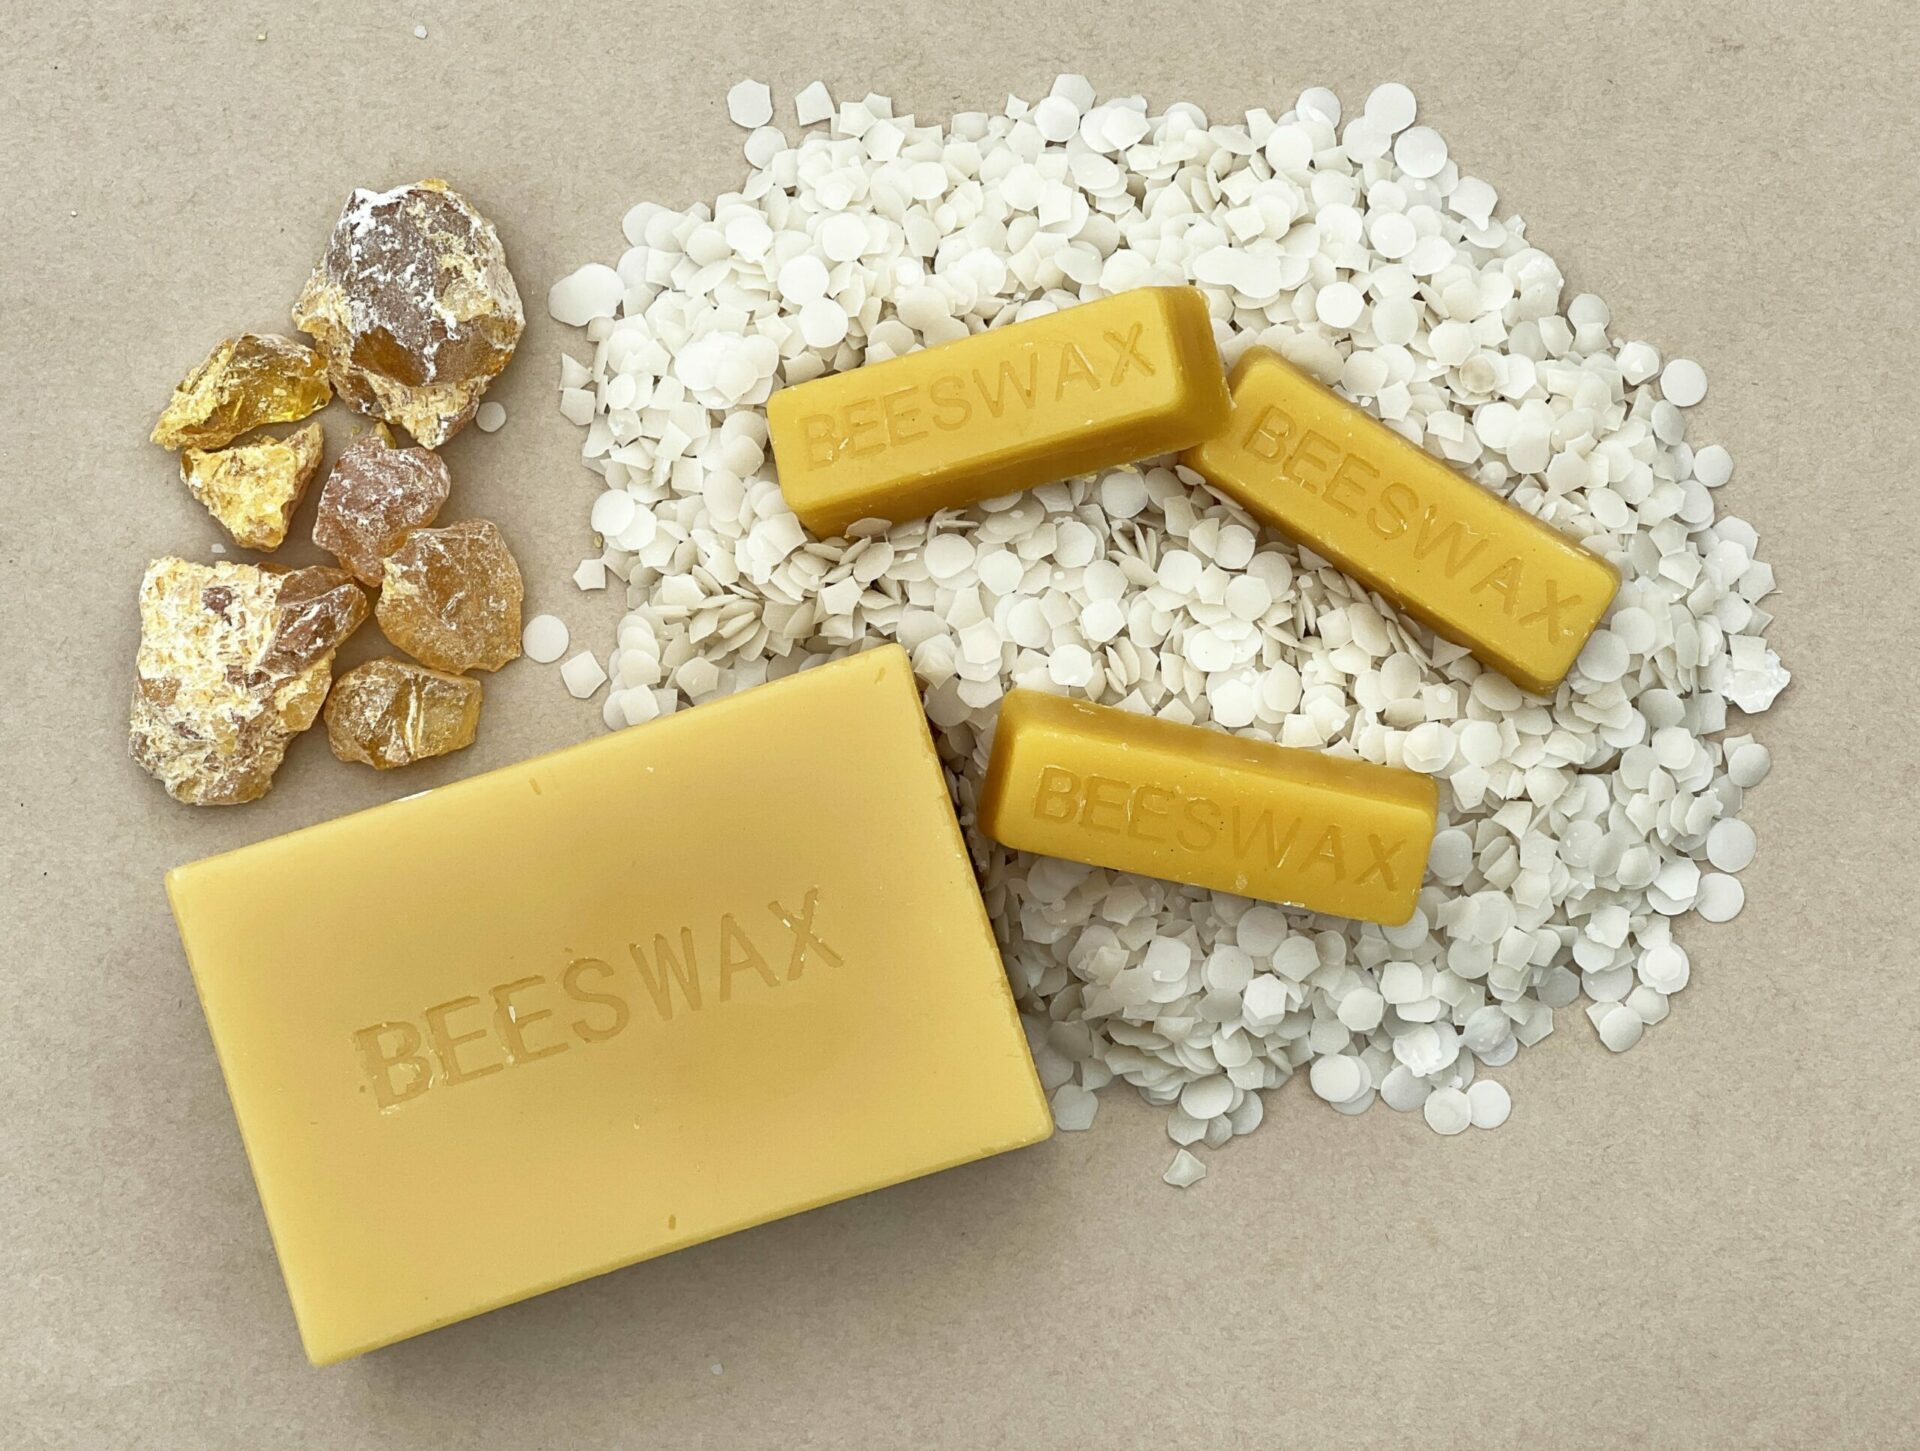 High quality beeswax produced for sale by the Urban Beehive